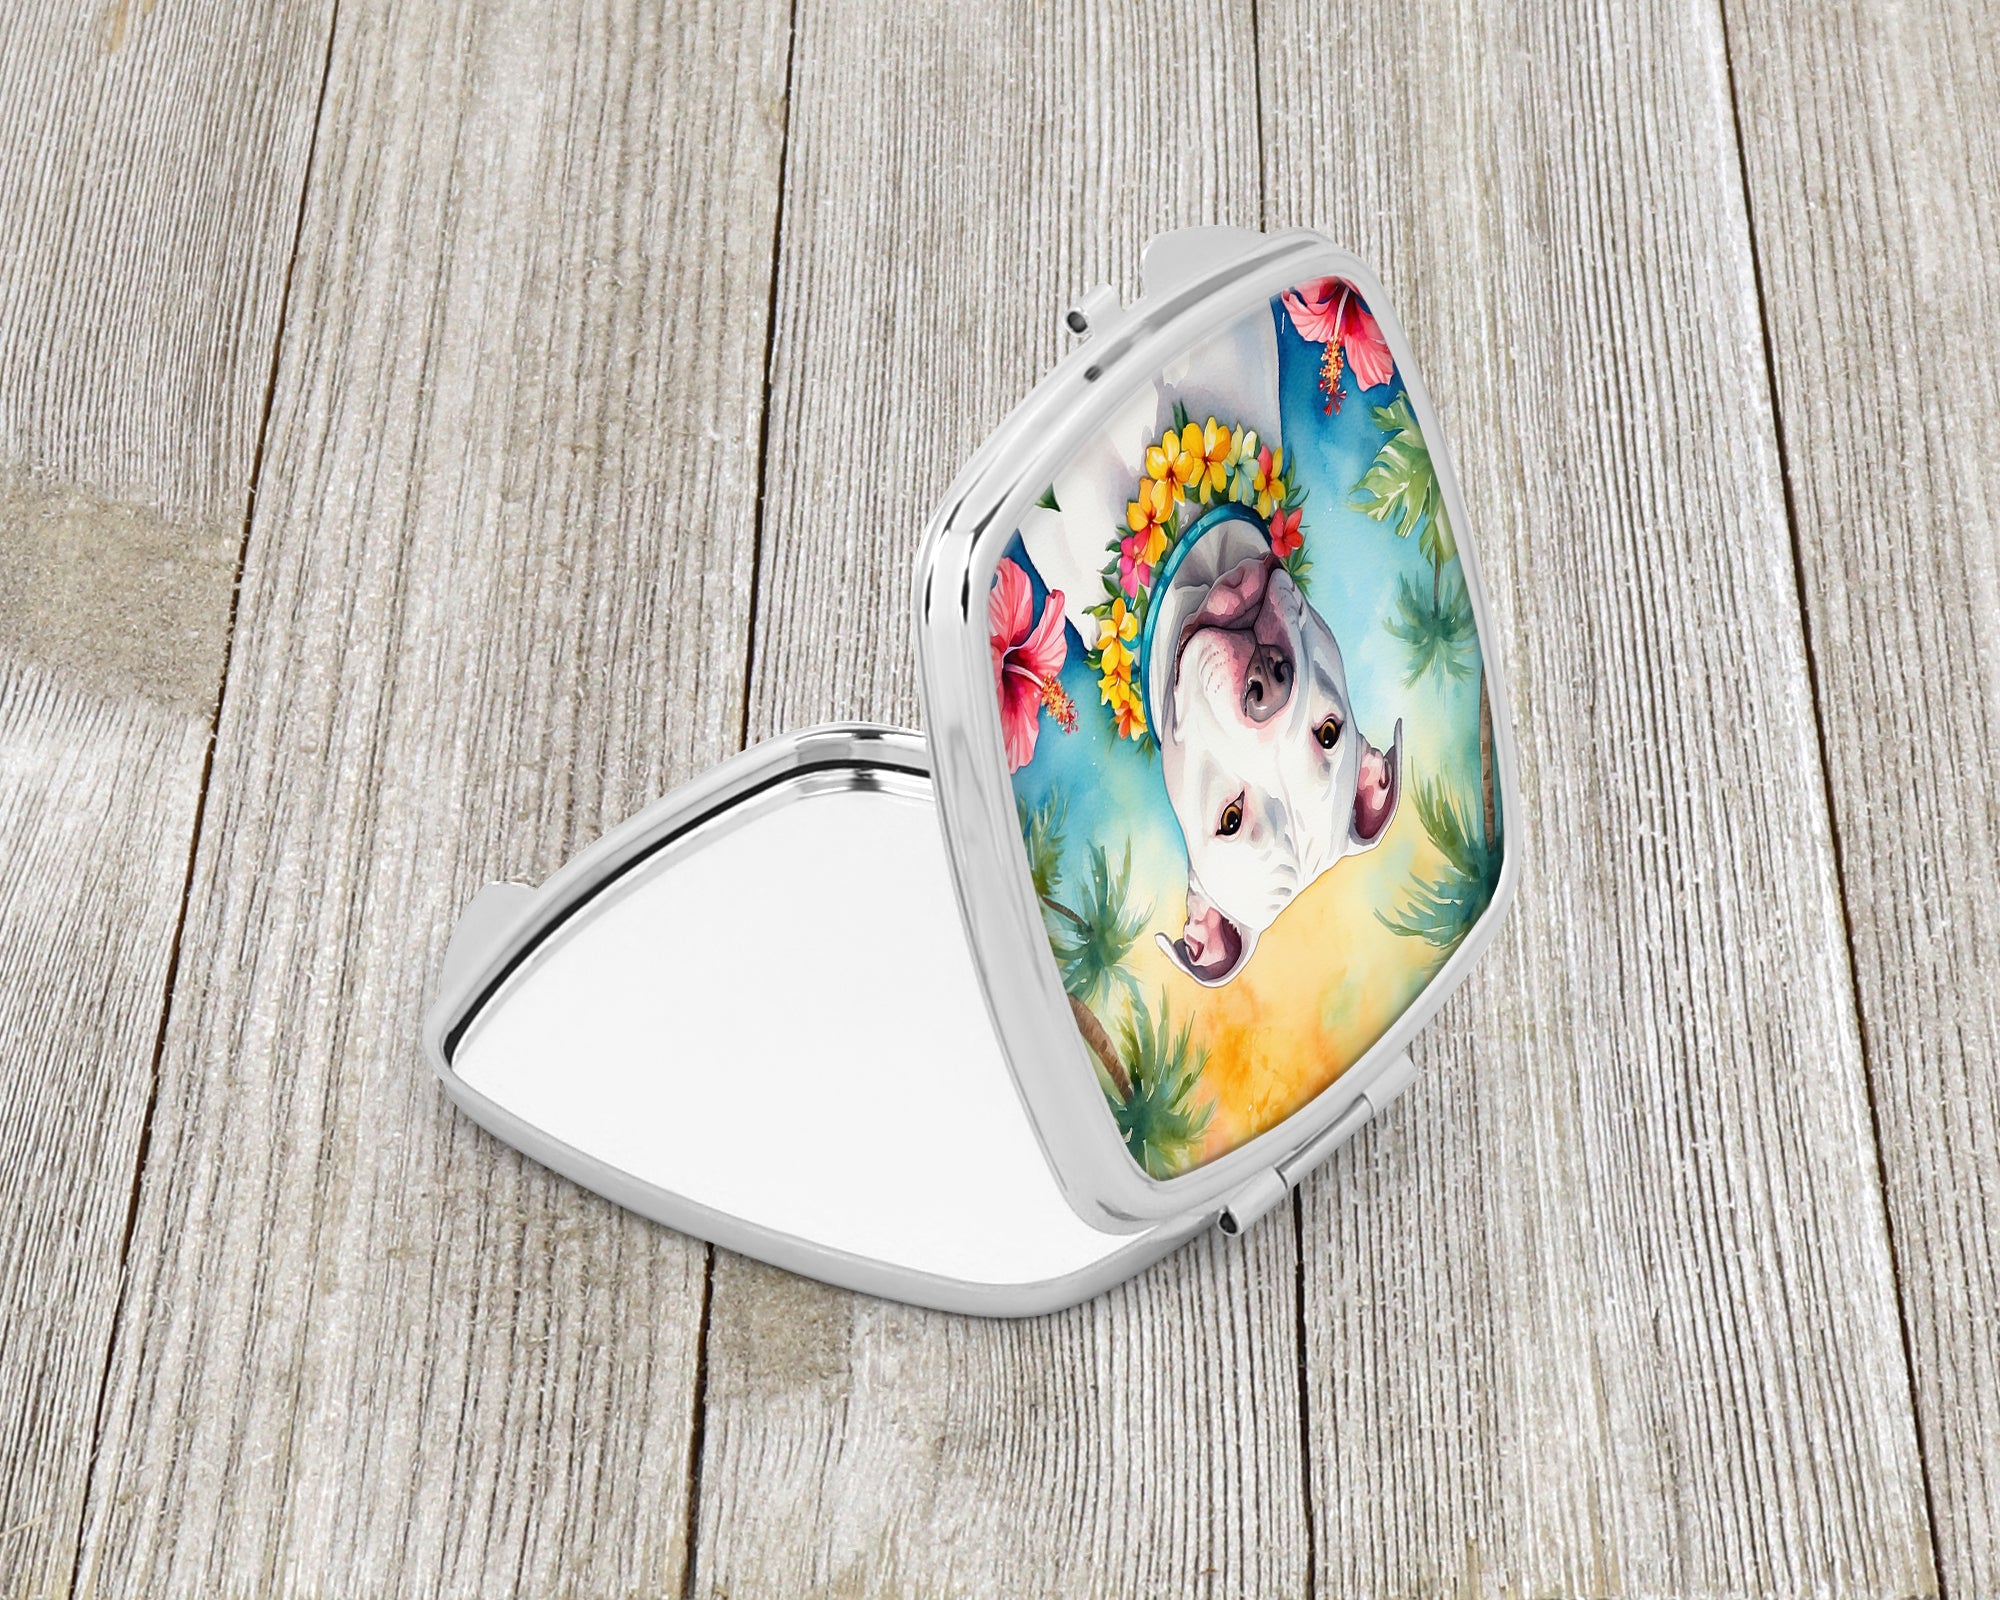 Buy this Pit Bull Terrier Luau Compact Mirror